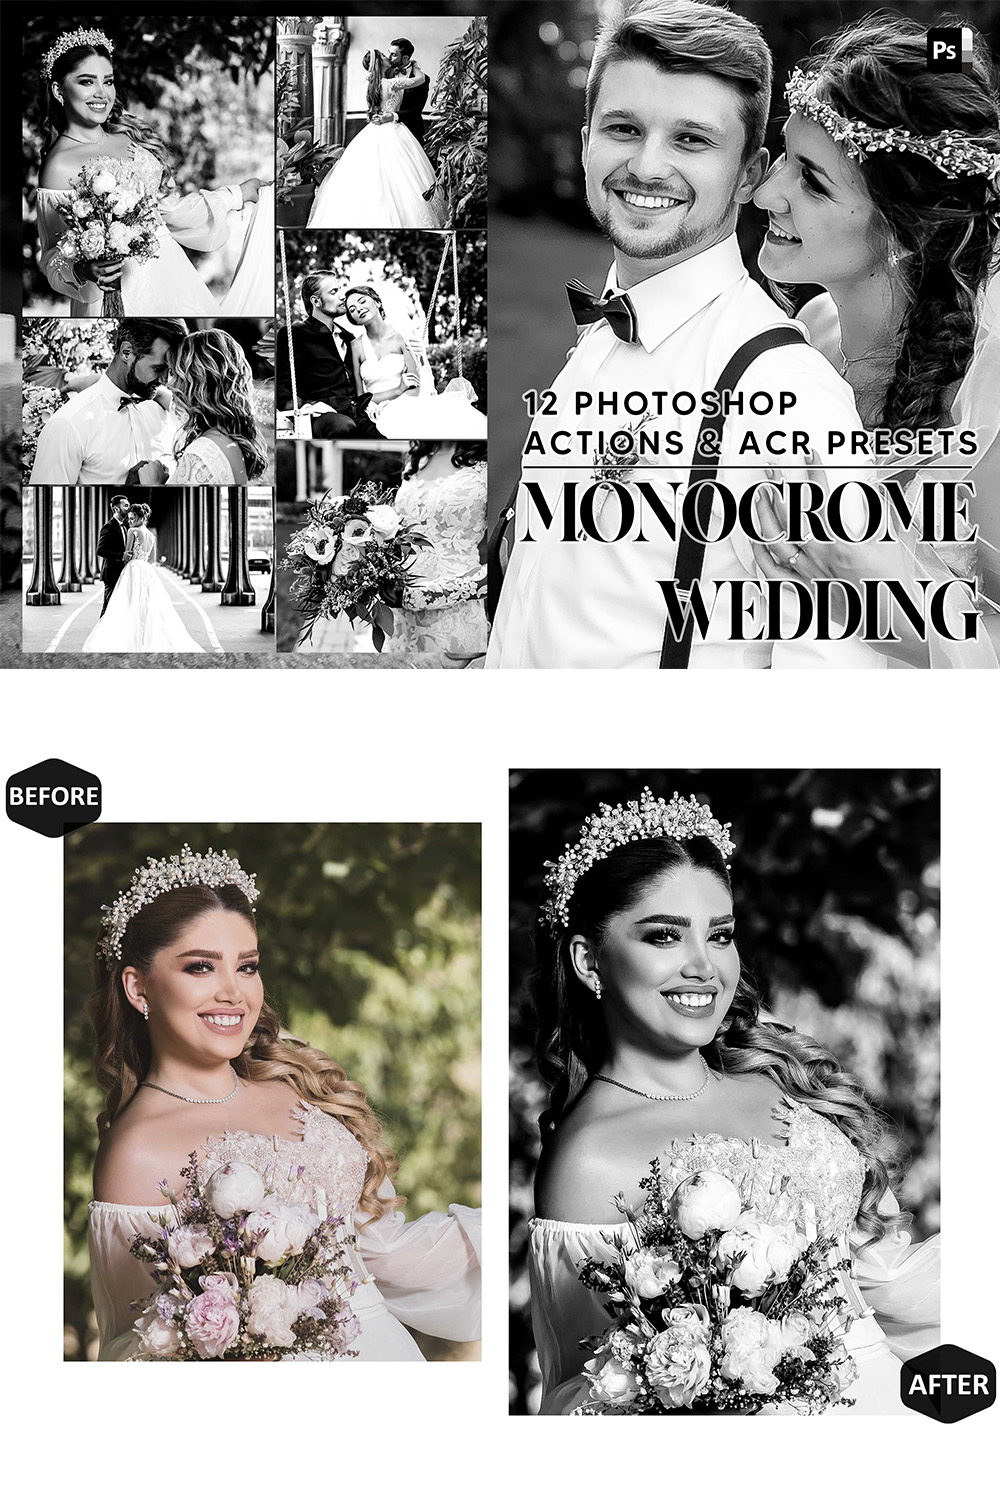 12 Photoshop Actions, Monochrome Wedding Ps Action, Black And White ACR Preset, Romantic Ps Filter, Portrait And Lifestyle Theme For Instagram, Blogger pinterest preview image.